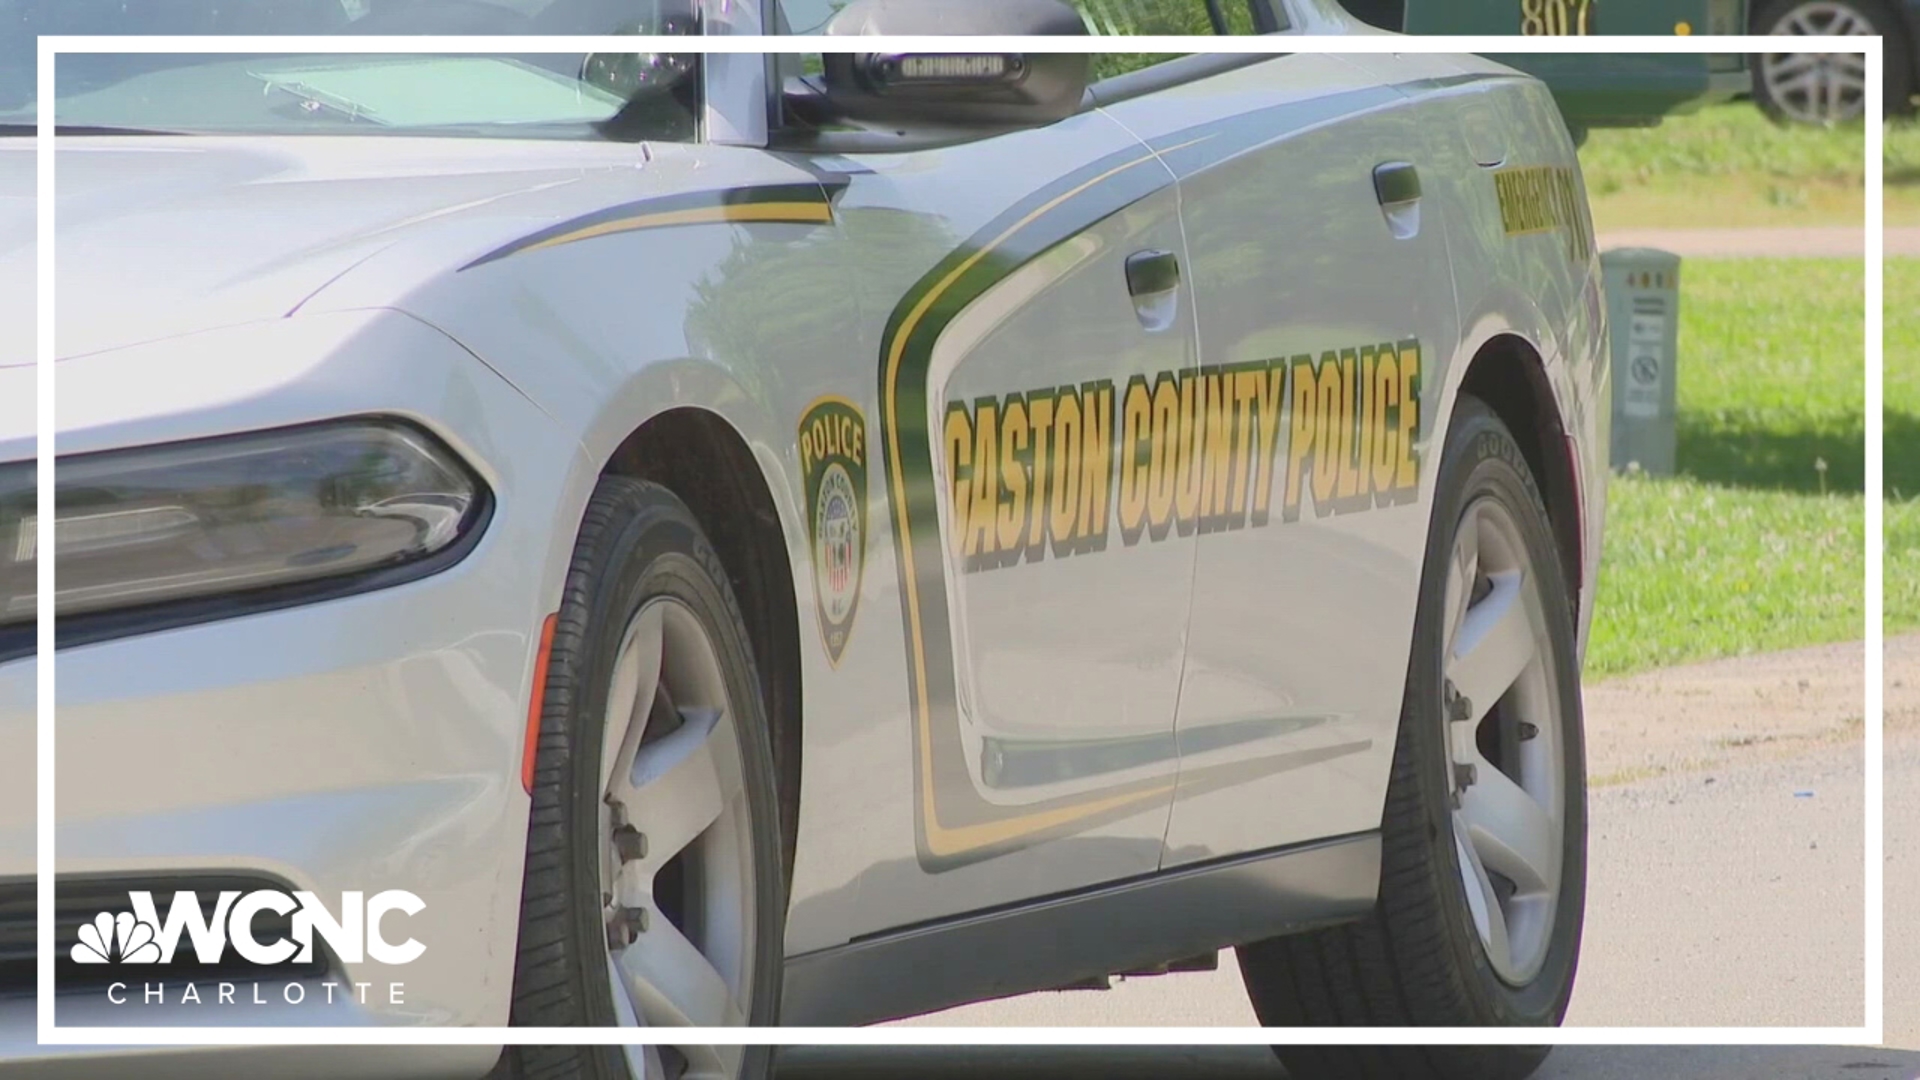 A man is facing several charges after being accused of leading officers on a high-speed chase in Gaston County.